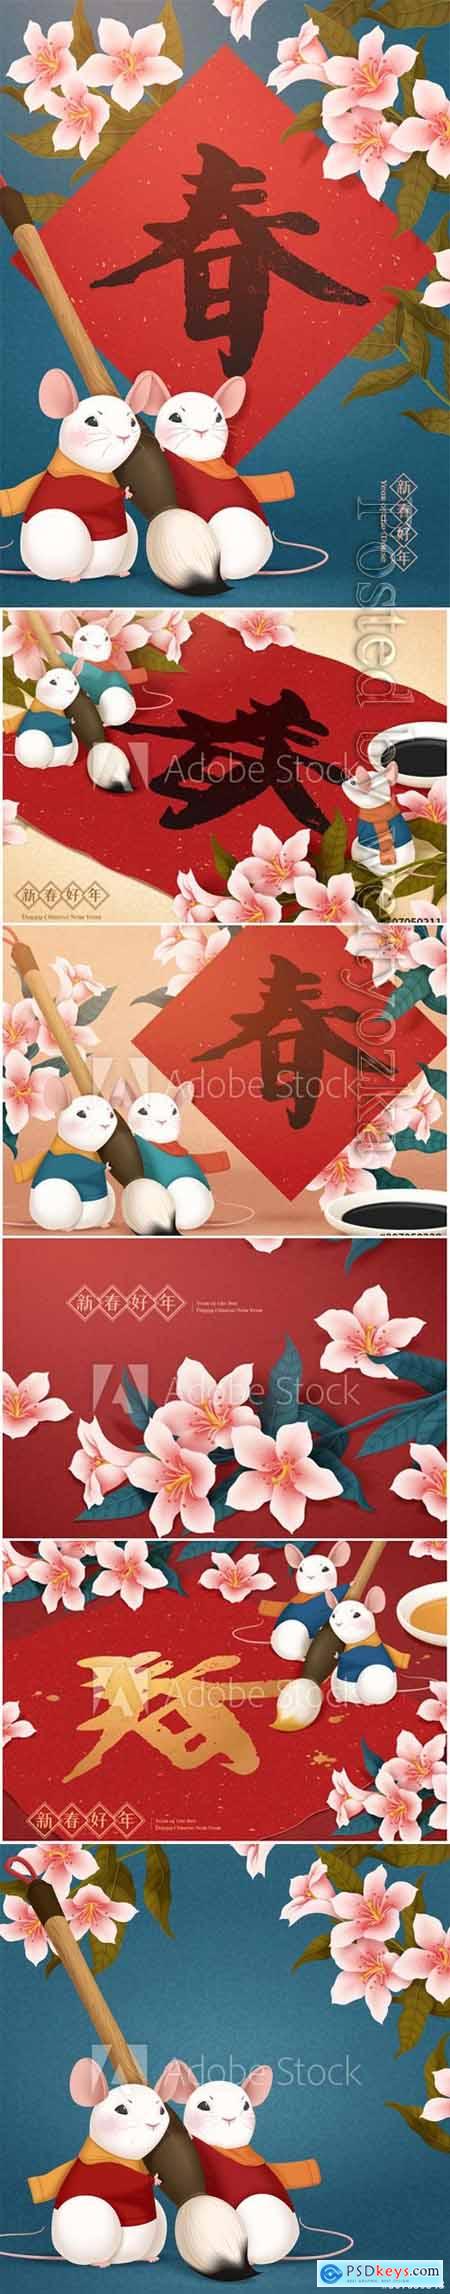 Cute mouse holding paint brush, New Year vector design